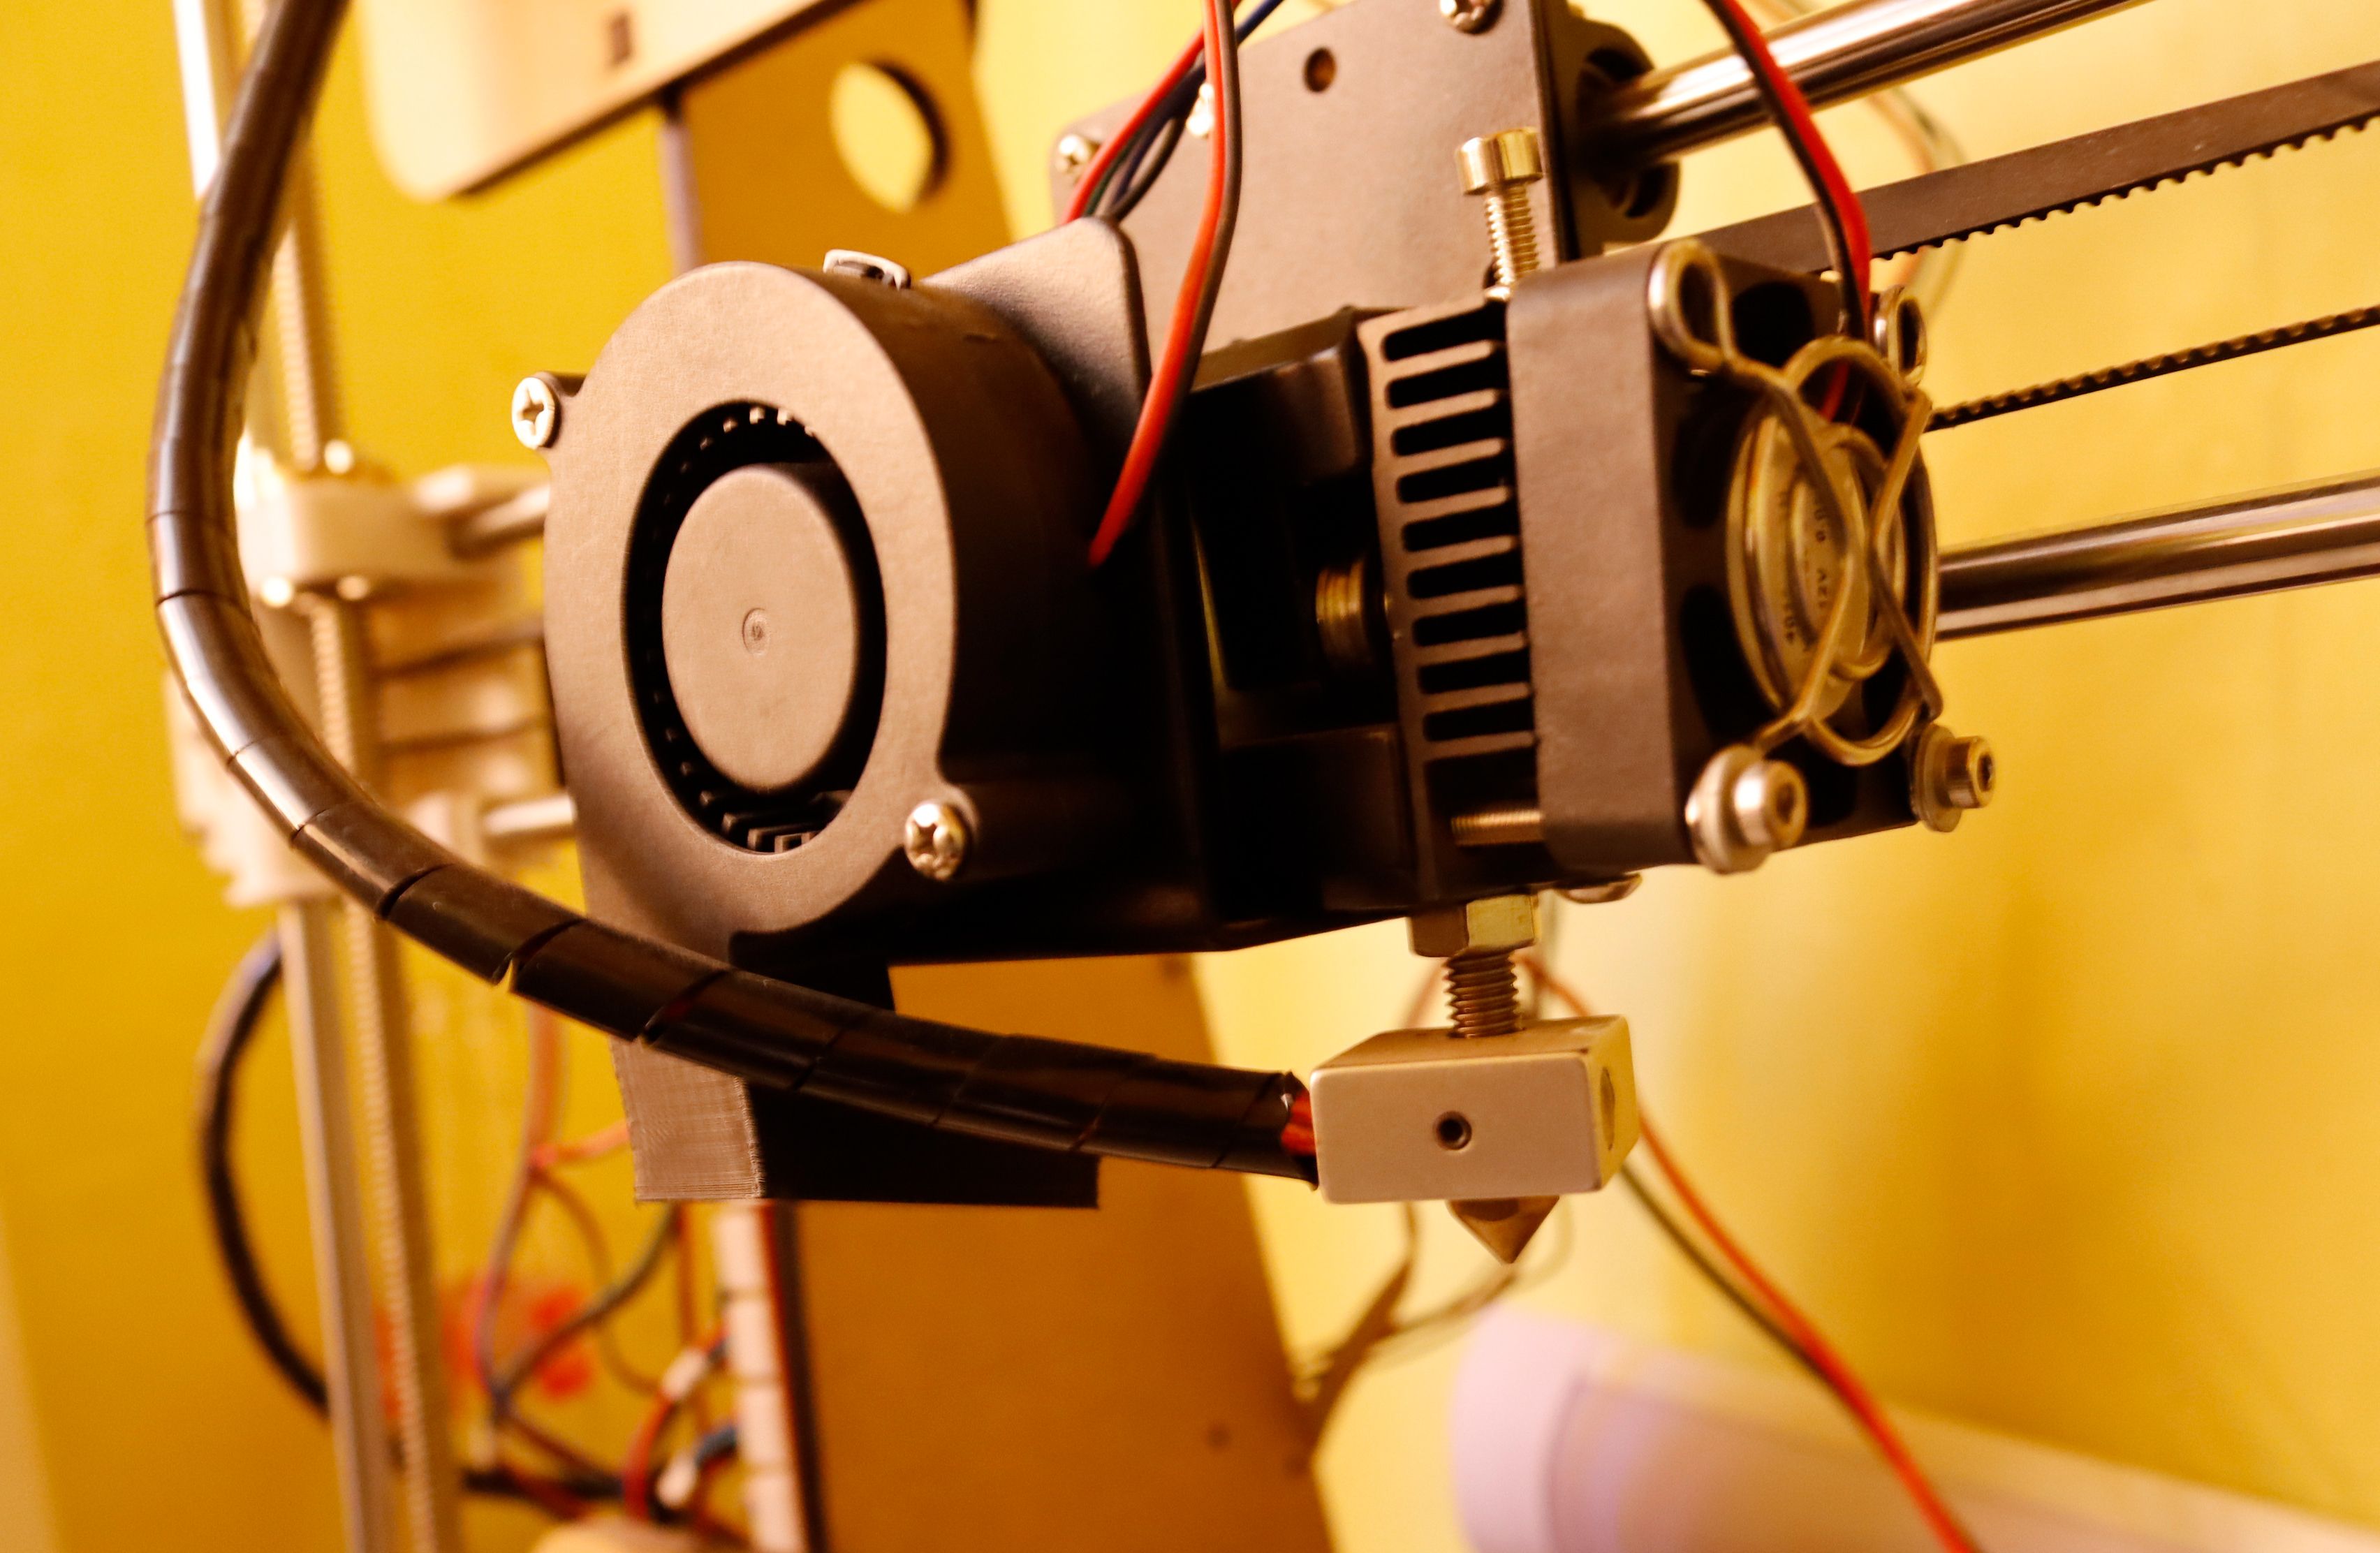 The extruder of Anet A8 3D Printer